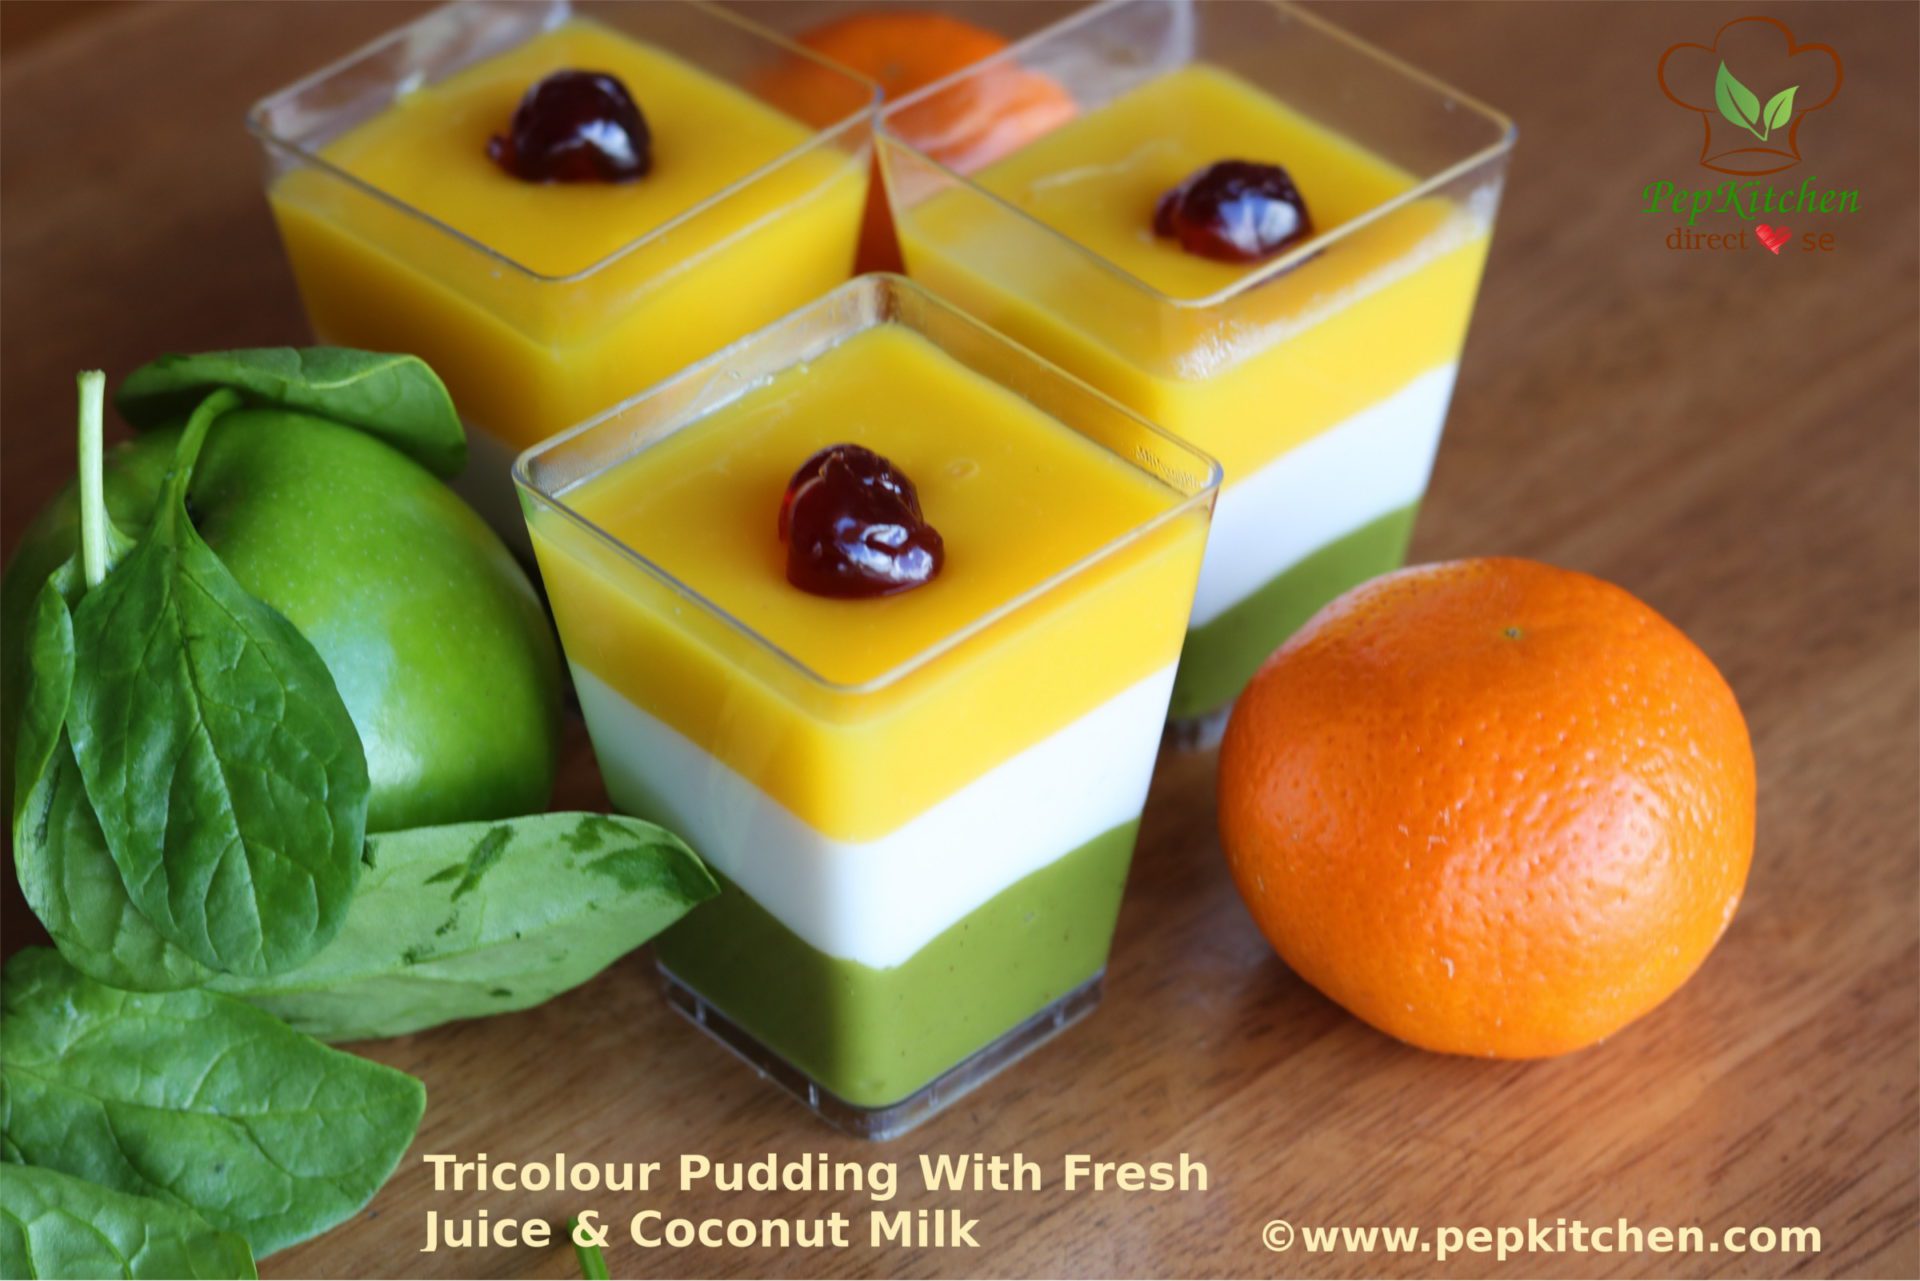 Tricolour Pudding With Fresh Juice And Coconut Milk